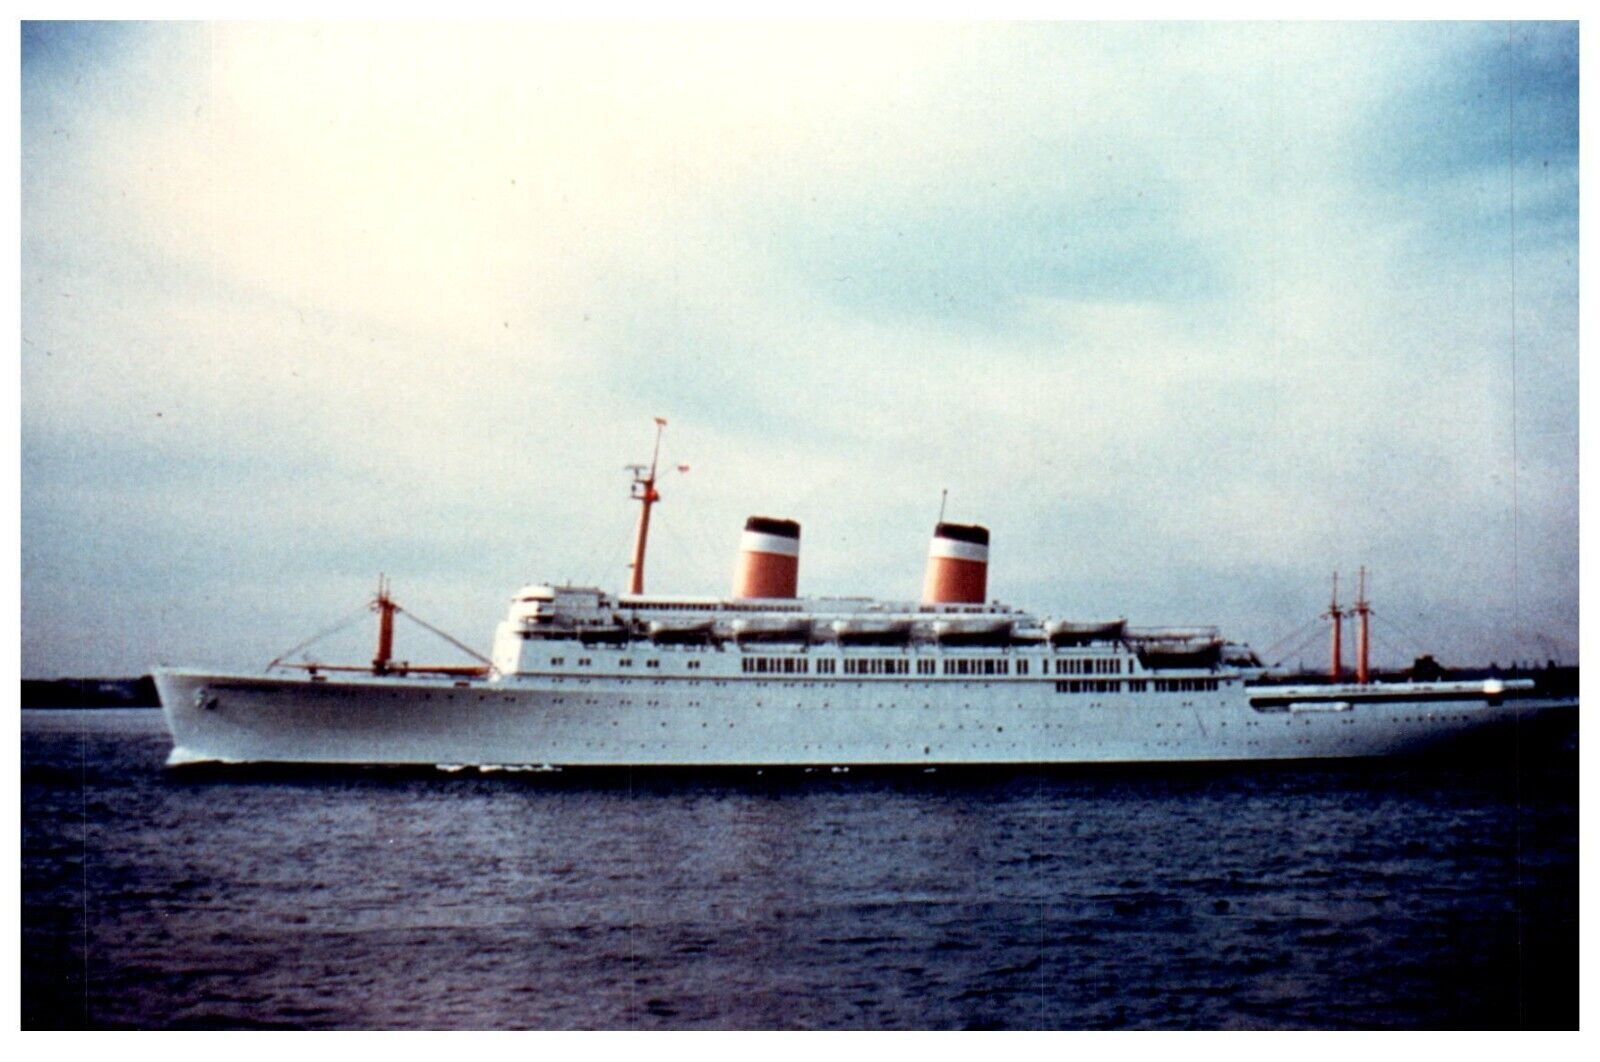 SS Independence (1952) American Export Line Cruise Ship Photo 4\